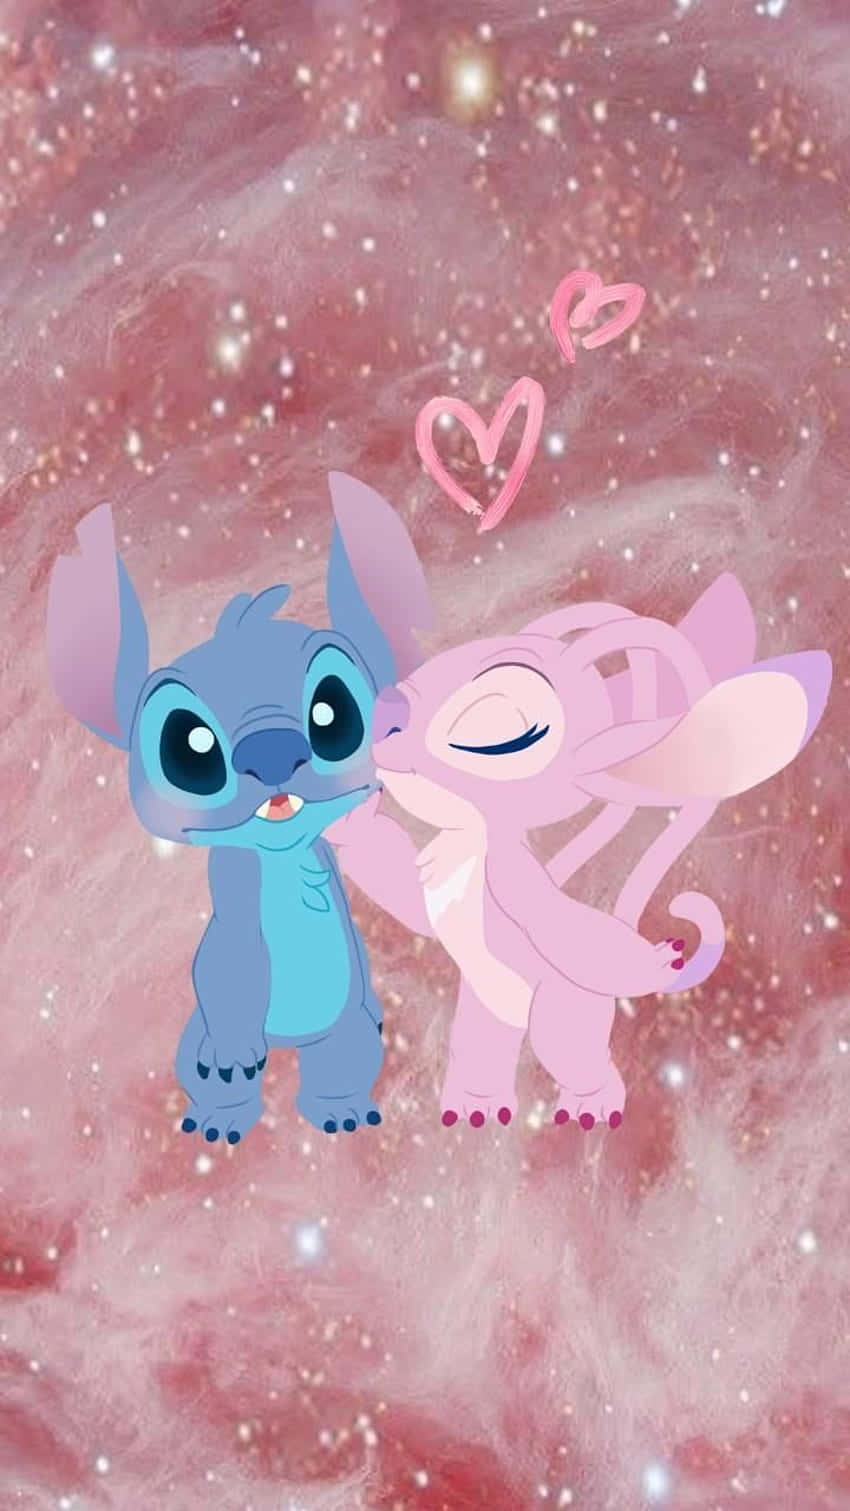 Stitch and Angel's Sweet Moment. Wallpaper